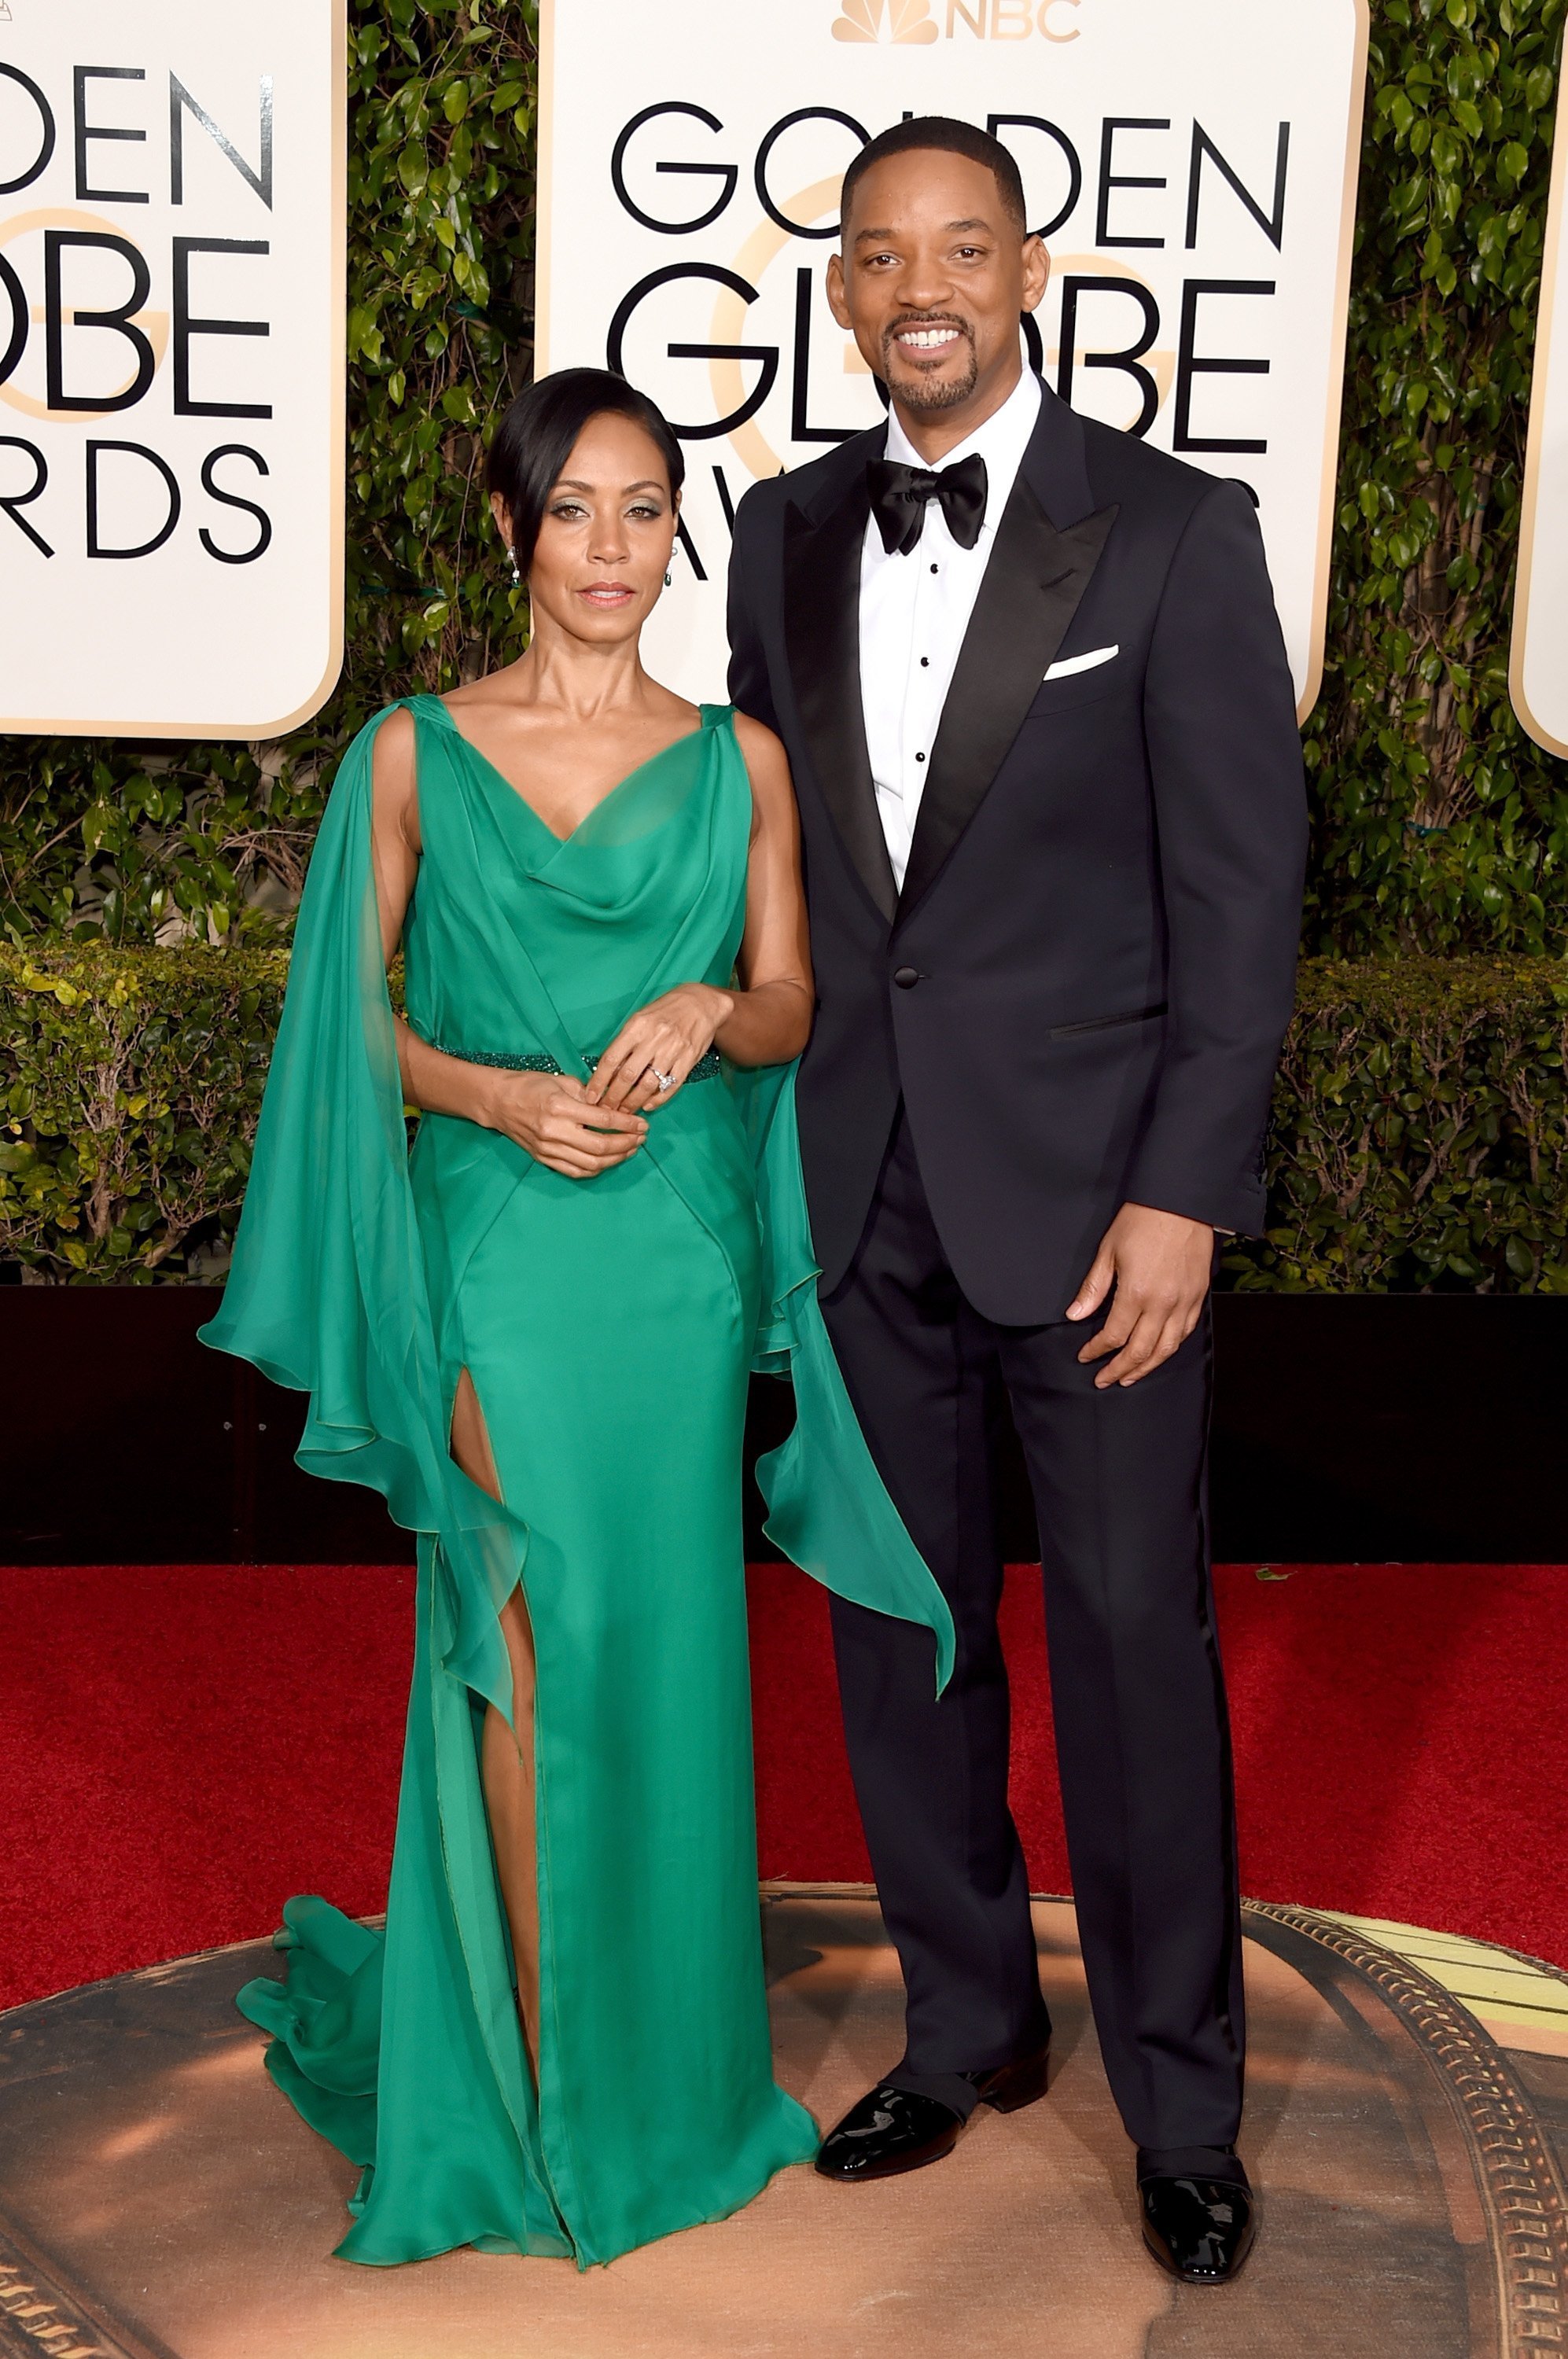 Actors Jada Pinkett Smith and Will Smith attend the 73rd Annual Golden Globe Awards held at the Beverly Hilton Hotel on January 10, 2016| Photo: Getty Images